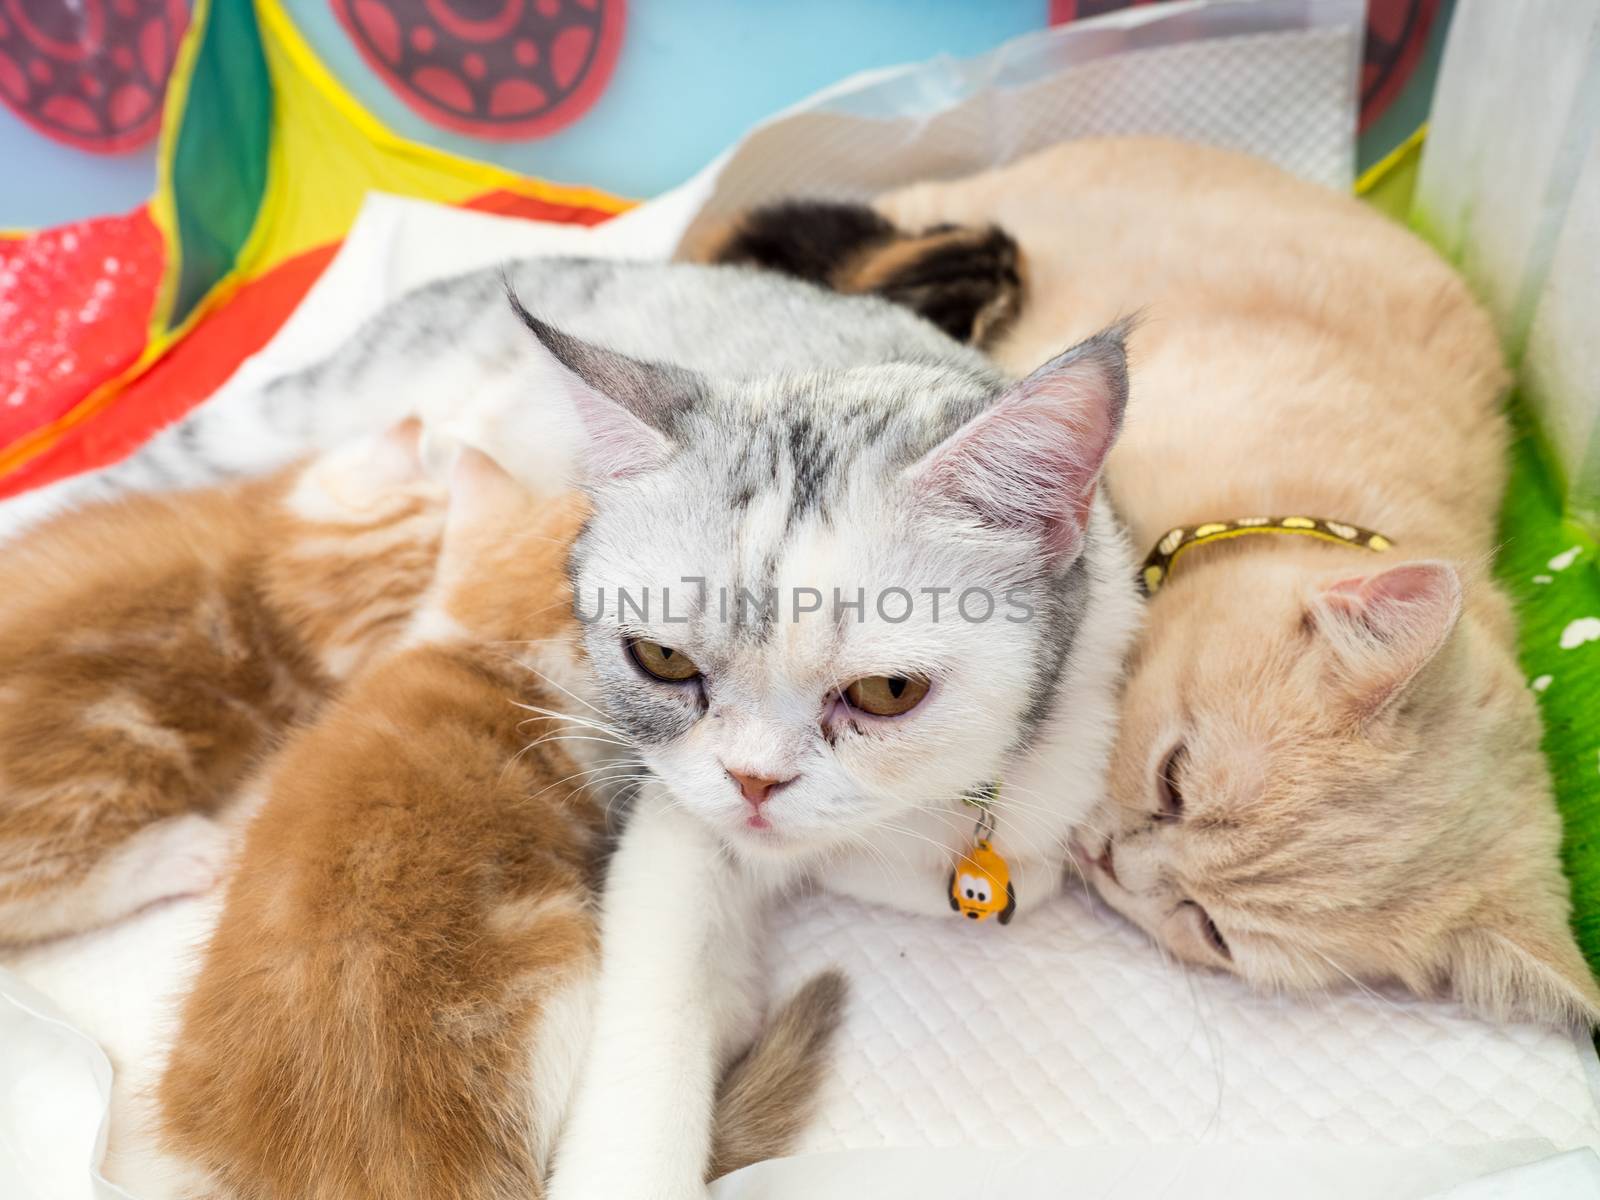 Cats breastfeeding the kittens, select focus